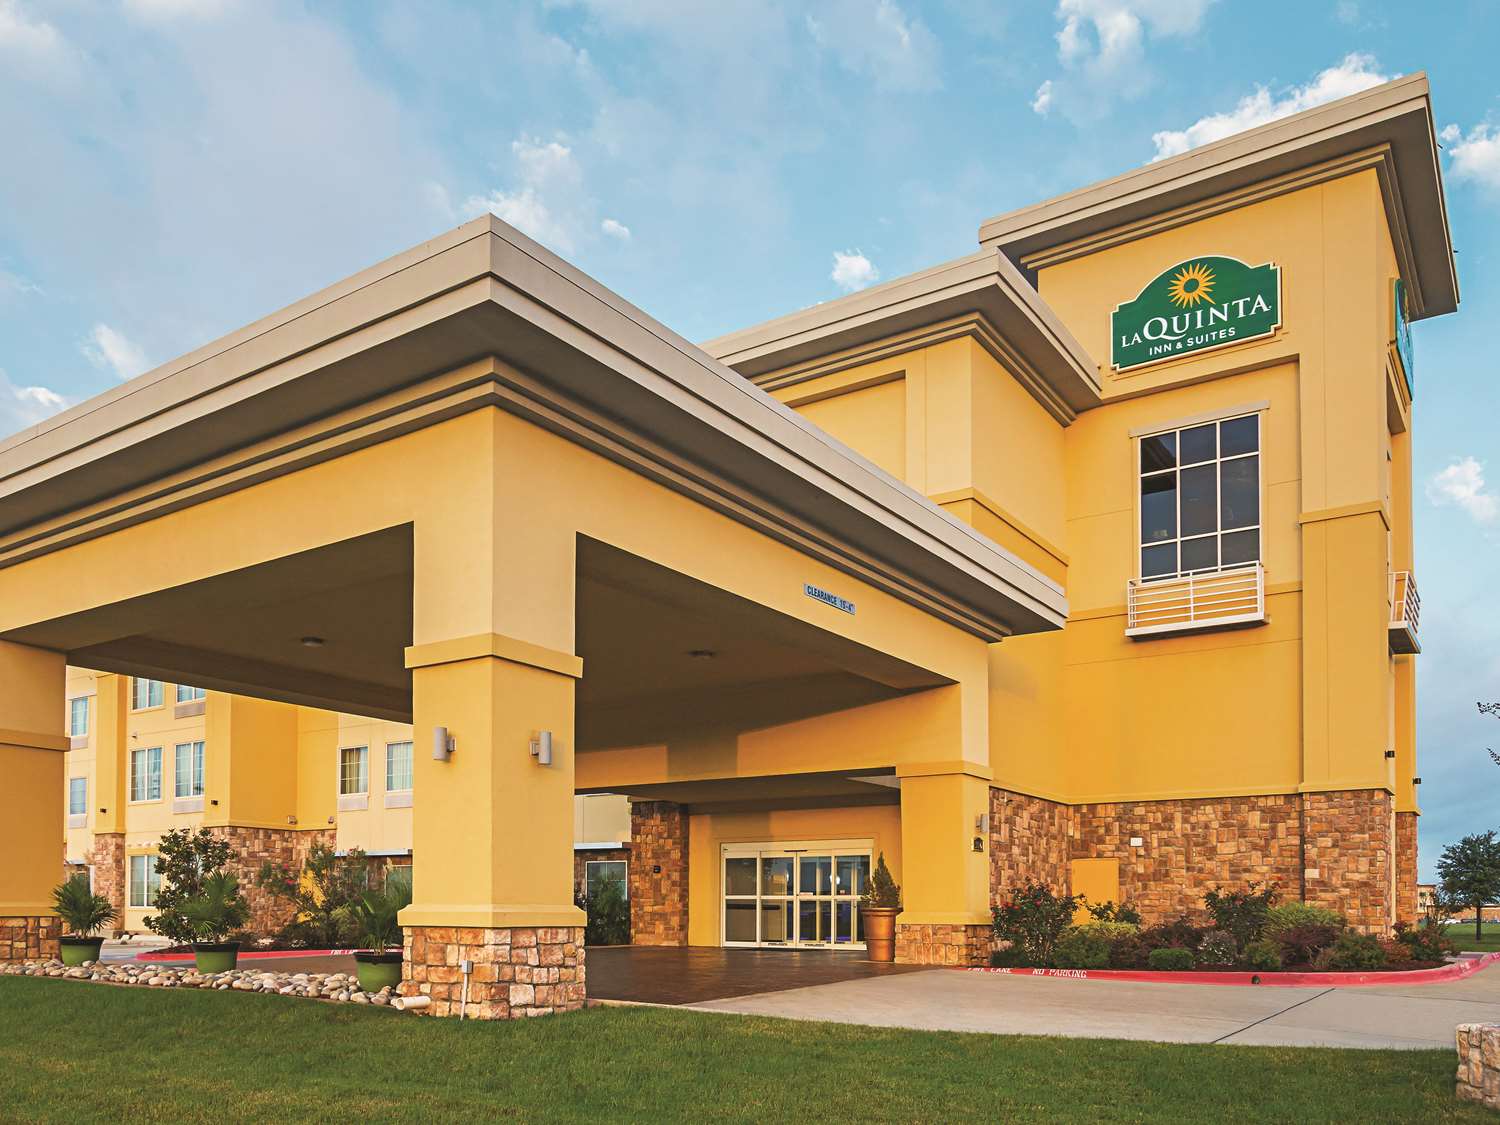 Pet Friendly La Quinta Inn & Suites Ft. Worth - Forest Hill, TX in Fort Worth, Texas